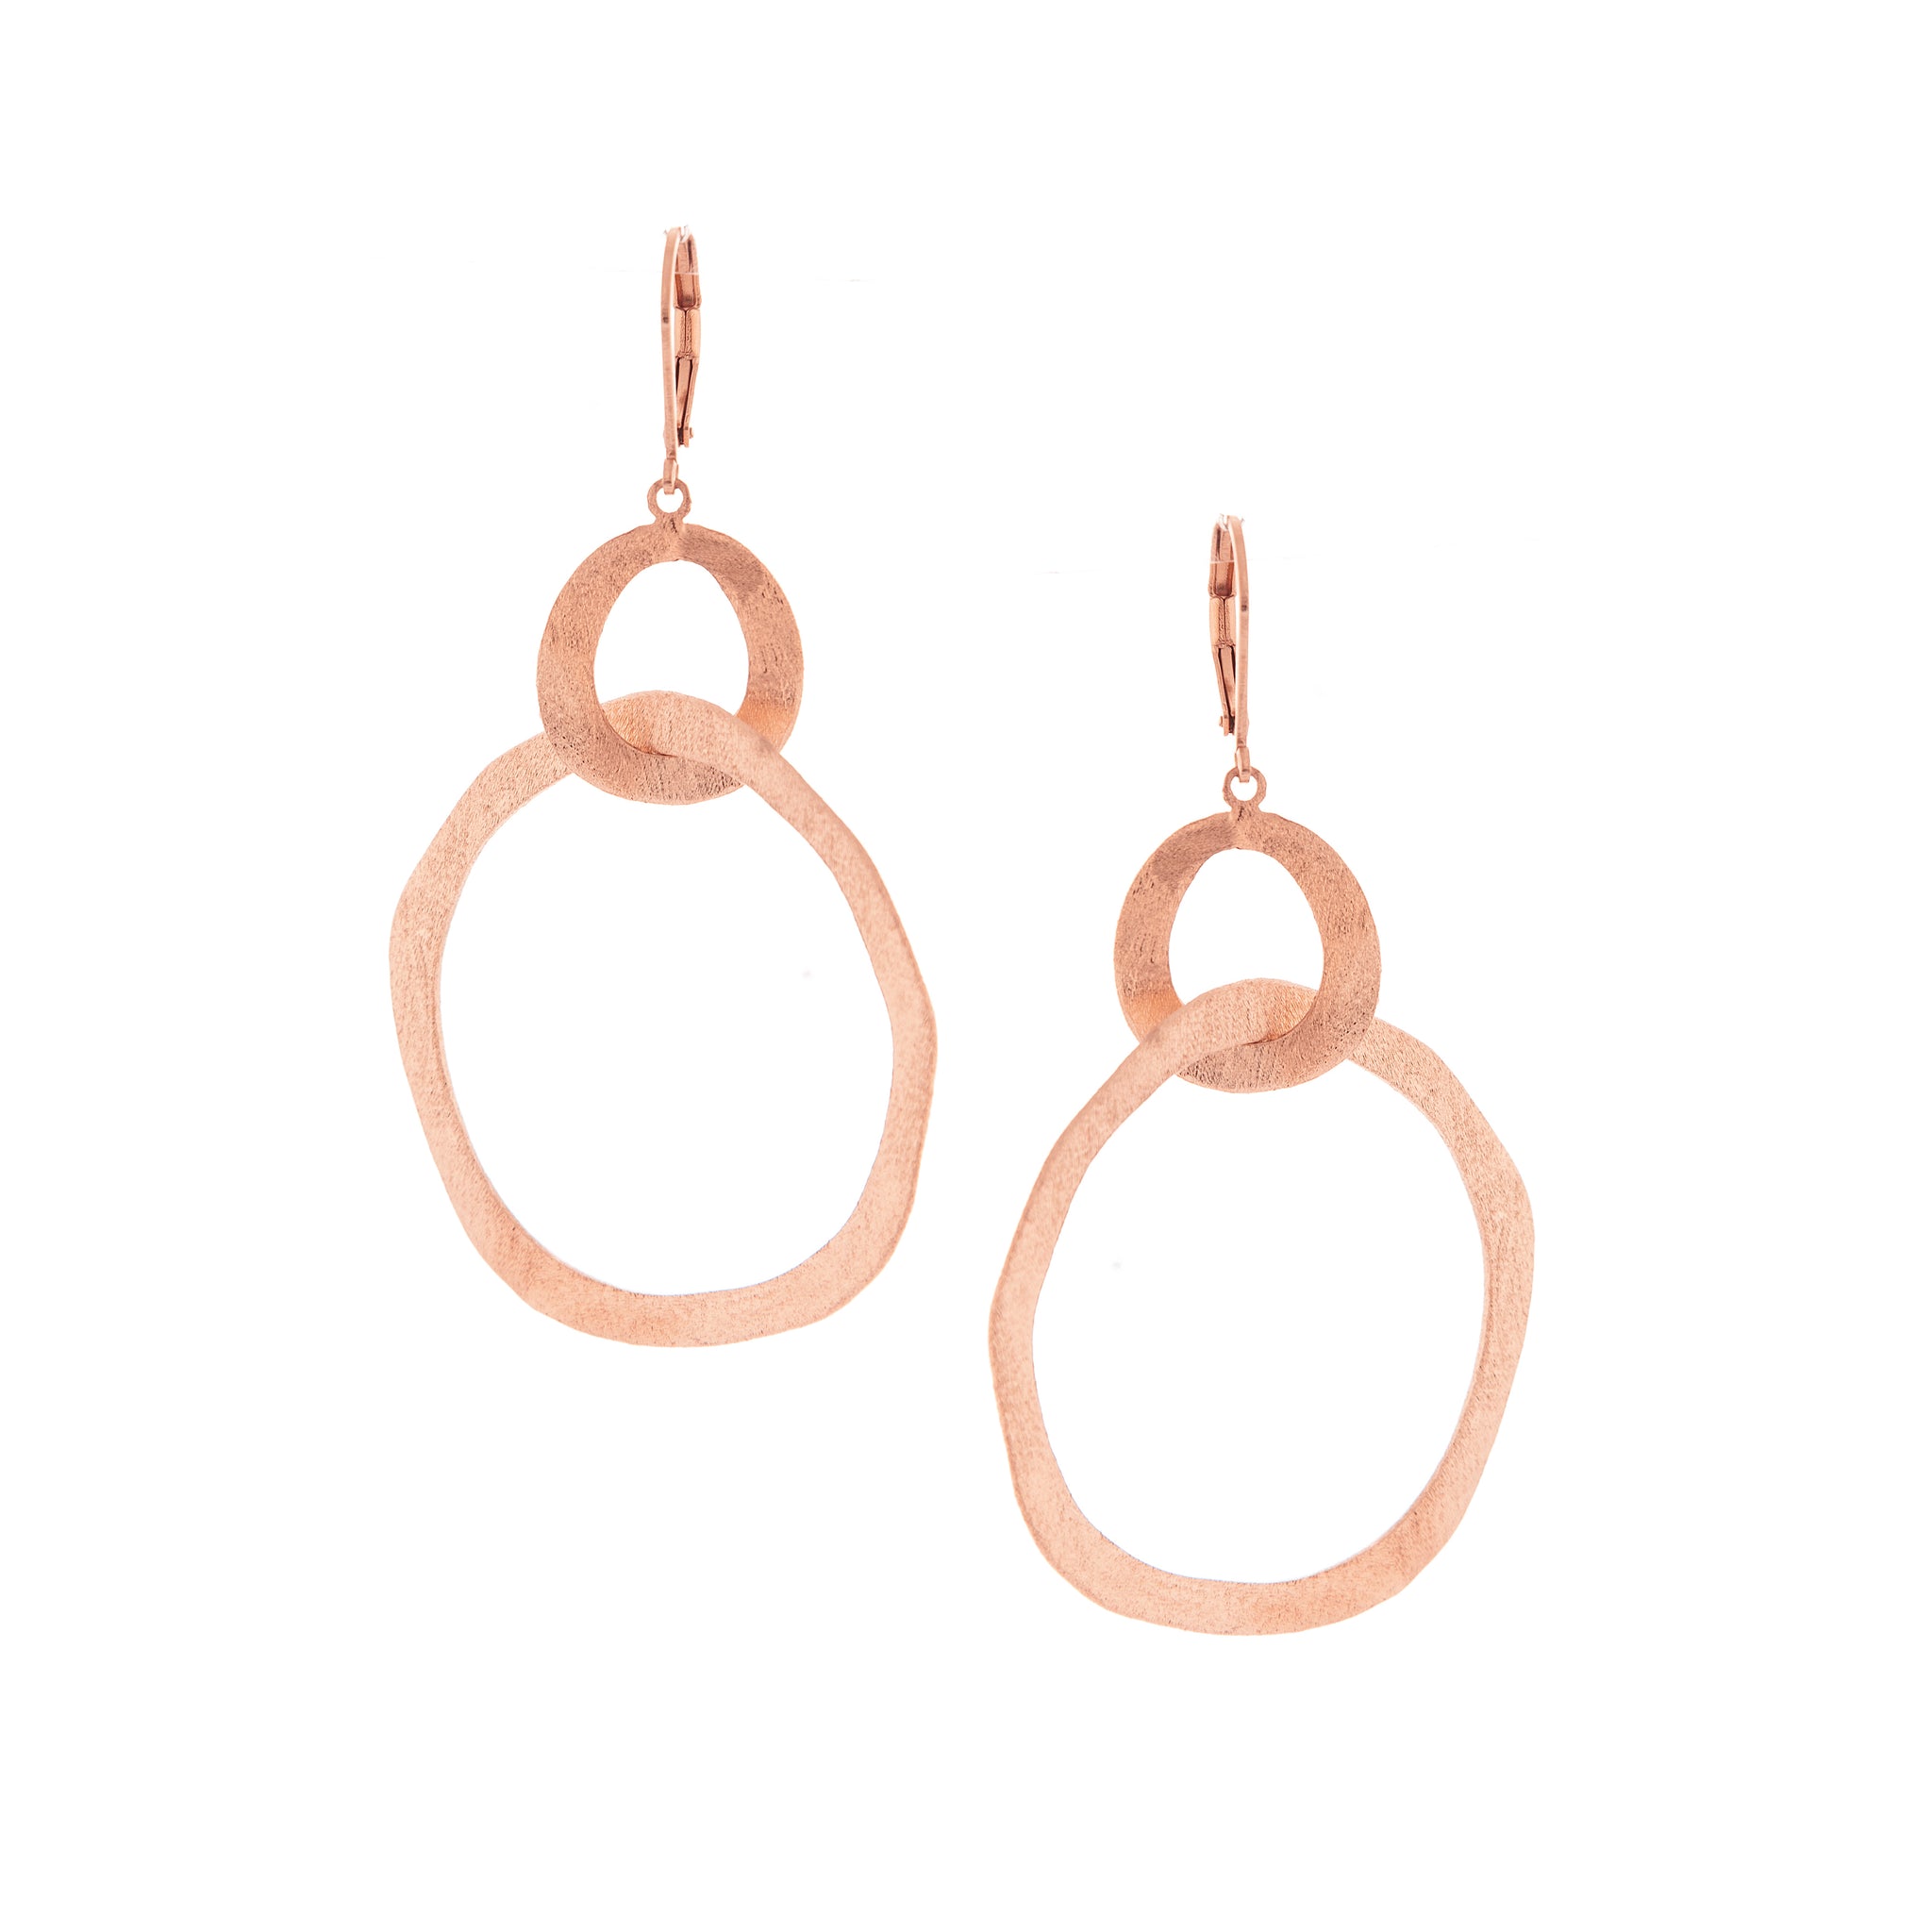 Organic Intertwined Round Rose Gold Dangle Earrings - Closeout